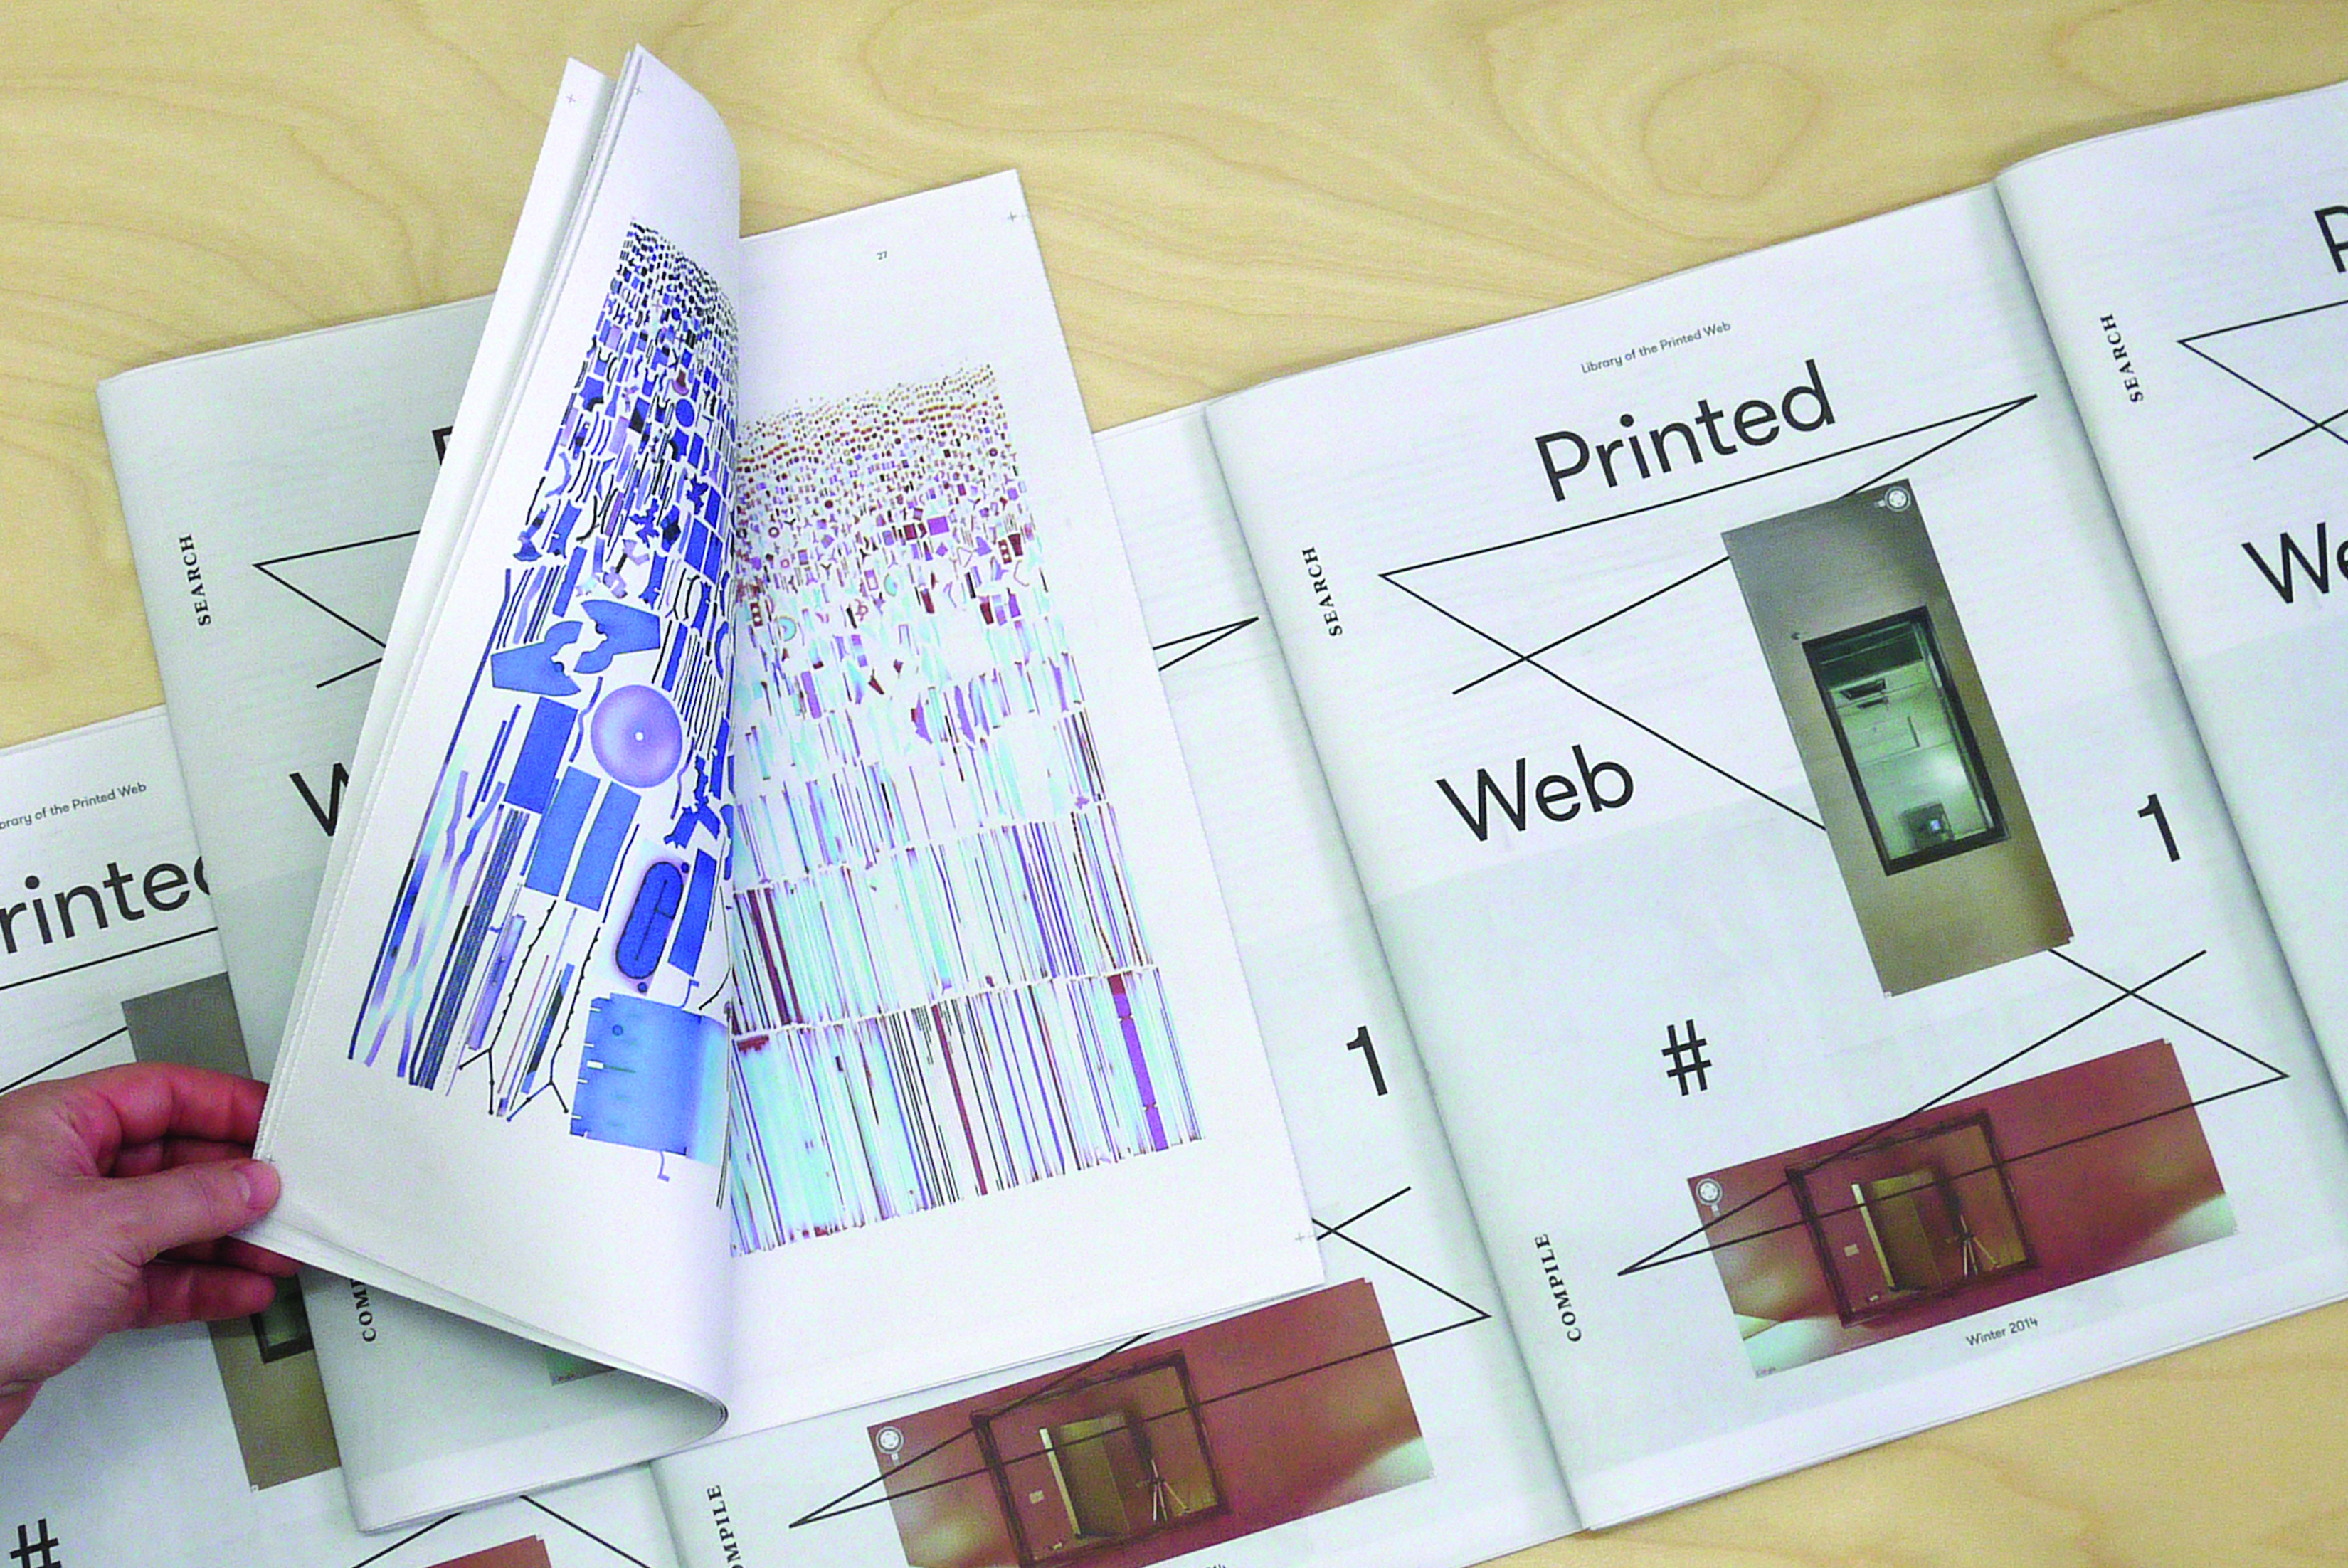 Printed Web 1, launched in January 2014